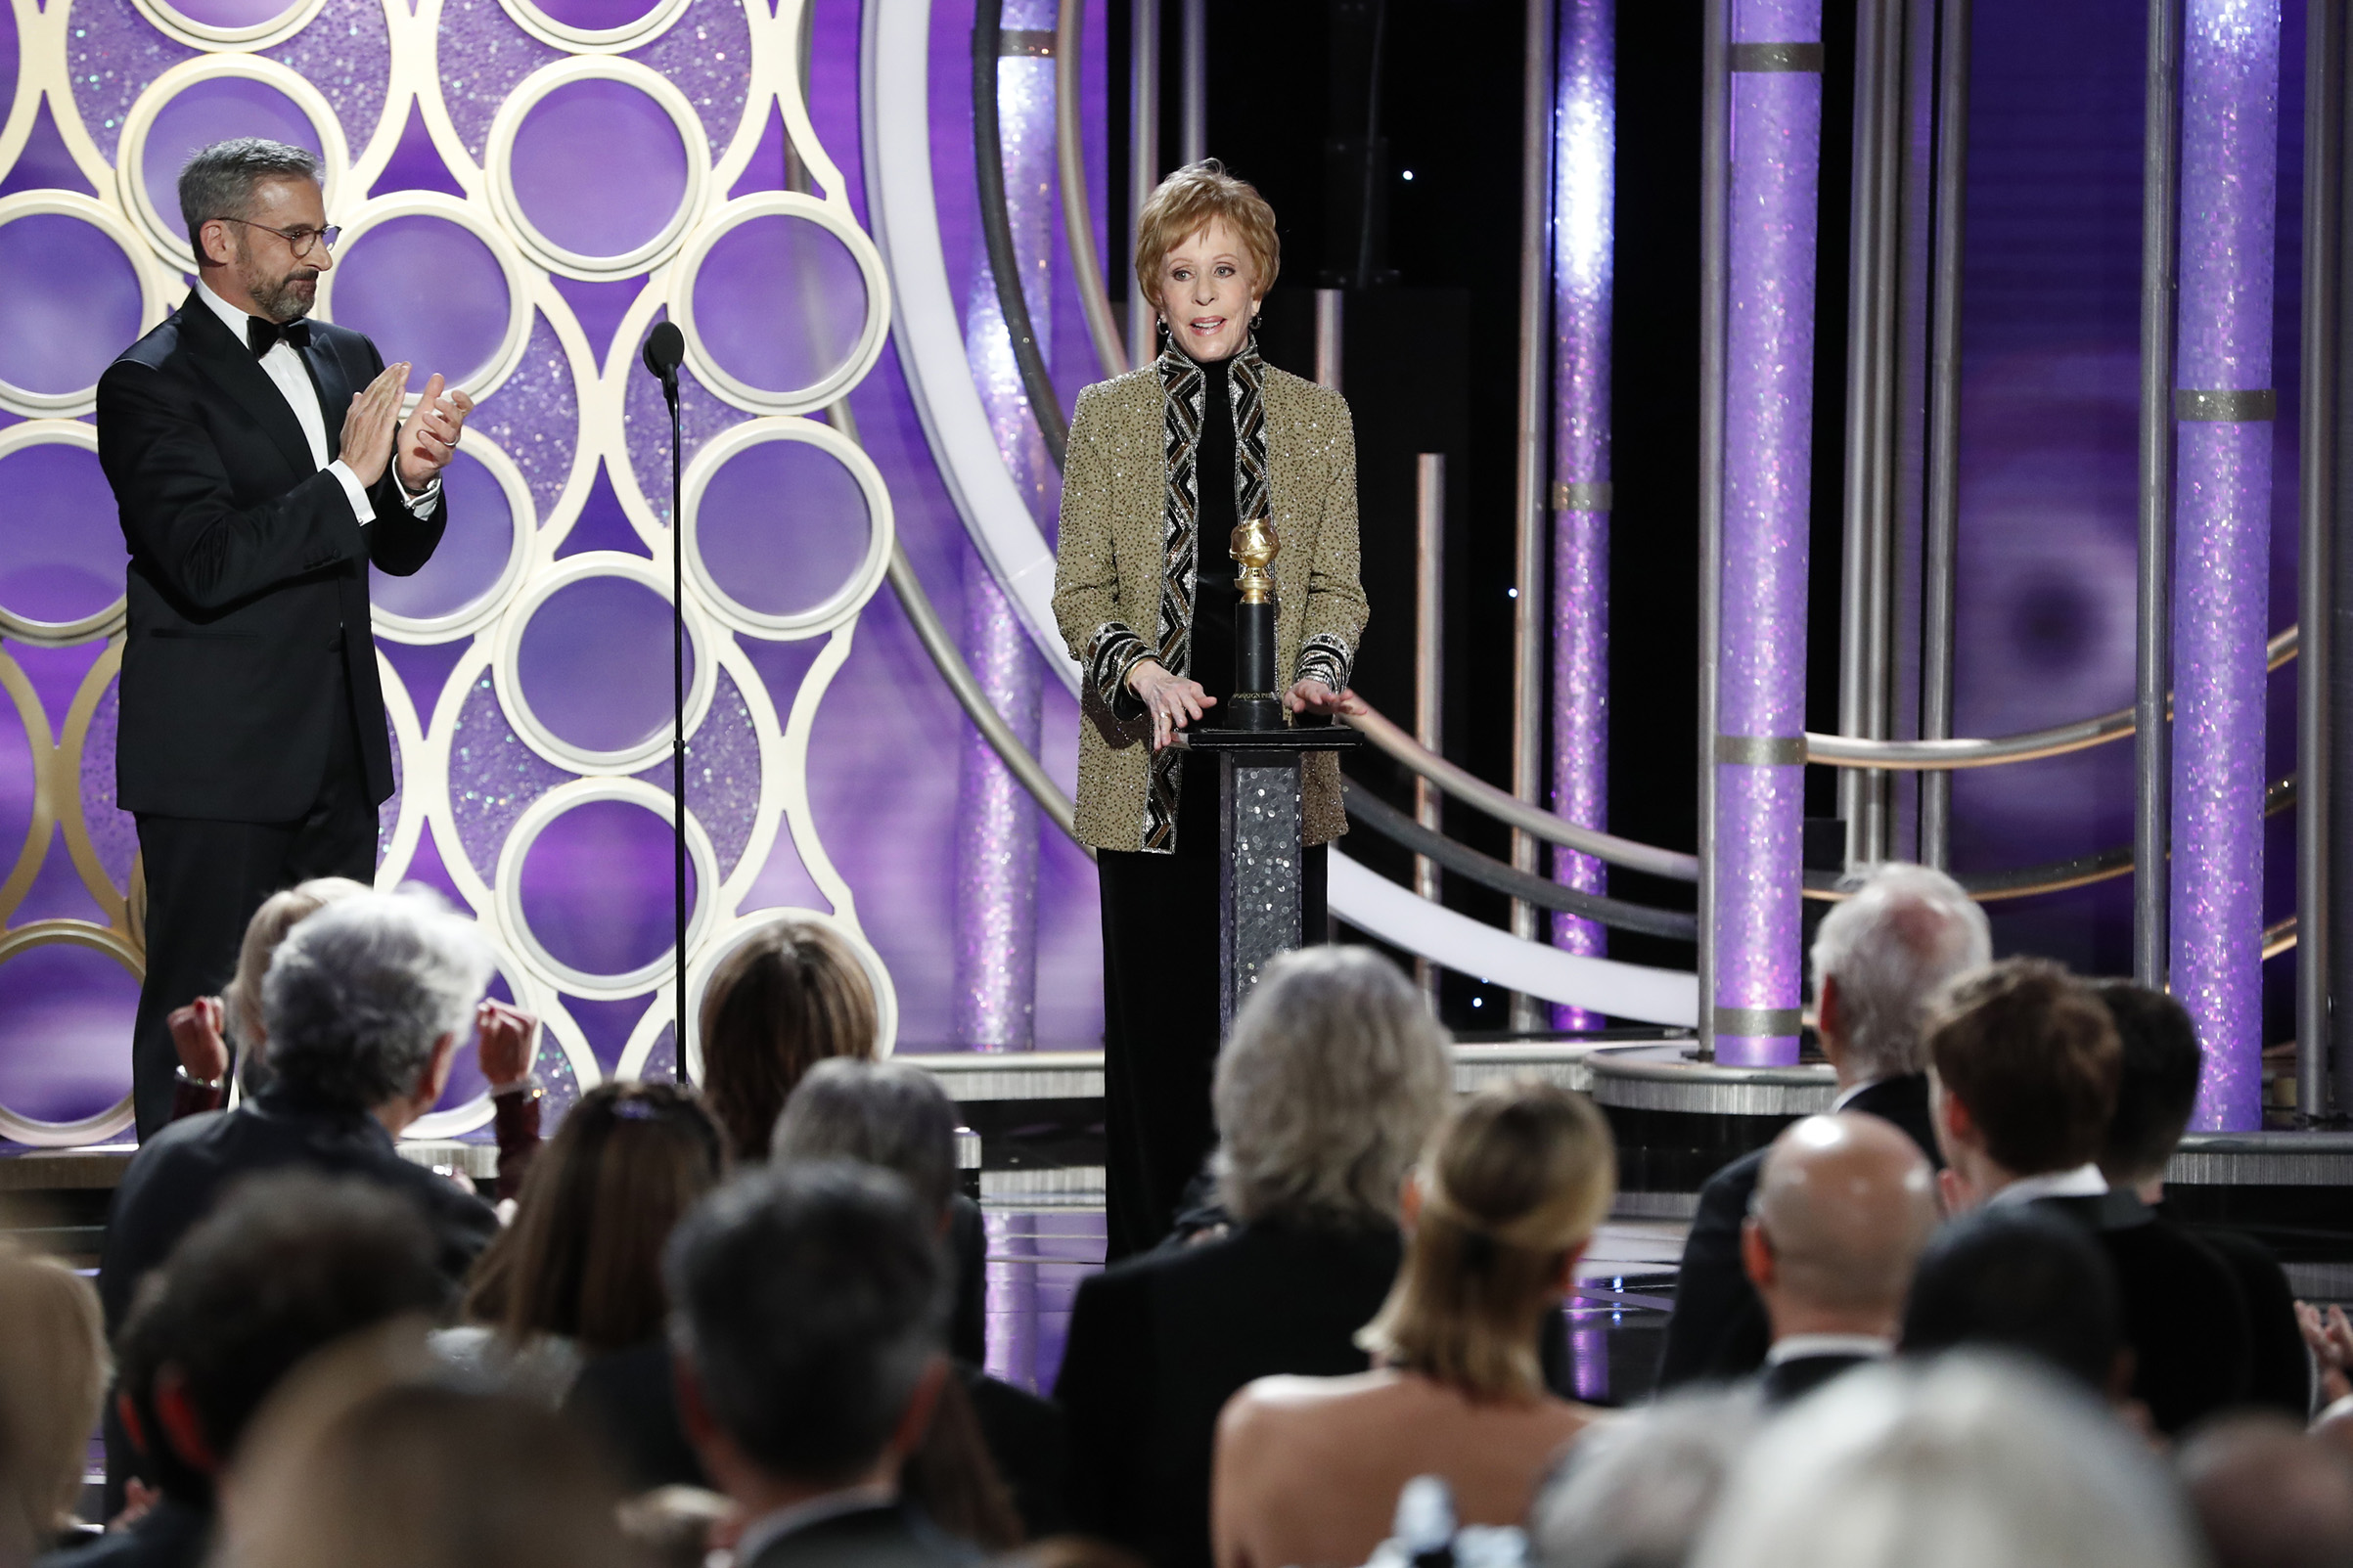 Carol Burnett accepts the Carol Burnett TV Achievement Award onstage during the 76th Annual Golden Globe Awards. (NBCUniversal/Getty Images)